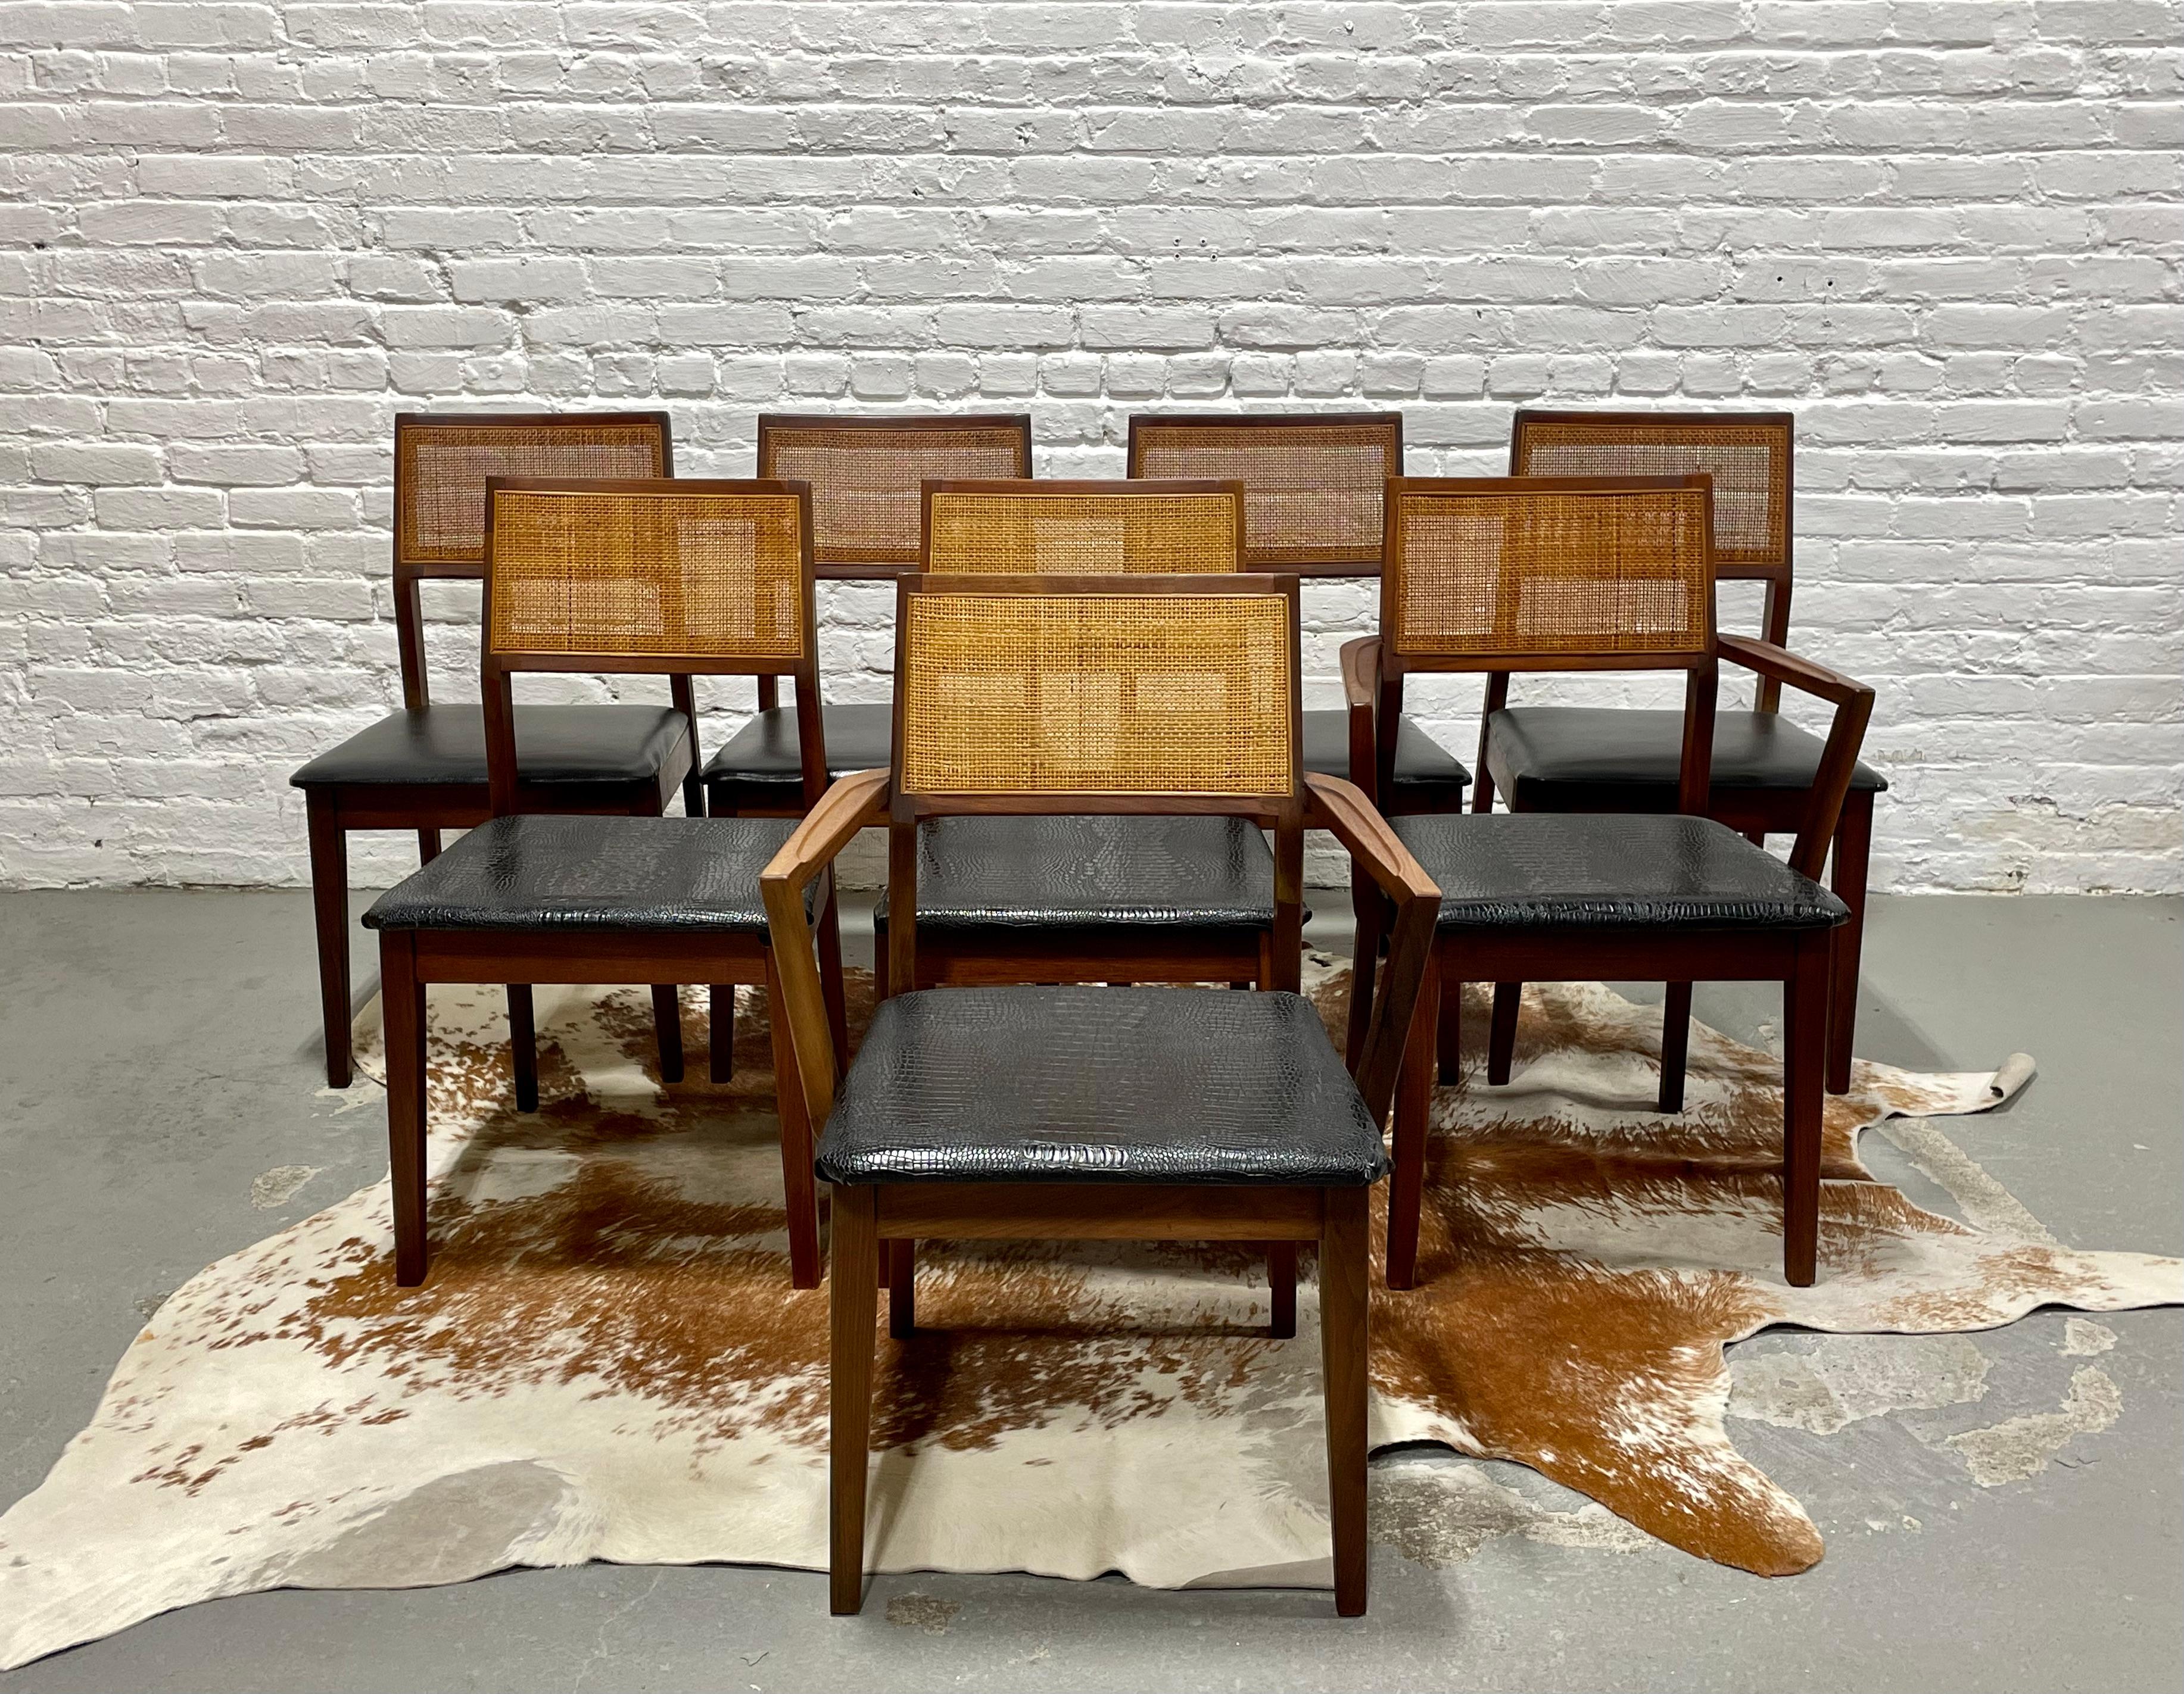 Set of EIGHT Mid Century Modern Walnut Caned Dining Chairs, c. 1960's. Lovely solid frames with incredible wood coloring and caned back rests. Upholstery is a simple black naugahyde on 4 of the chairs and a faux black lizard skin on the armchairs